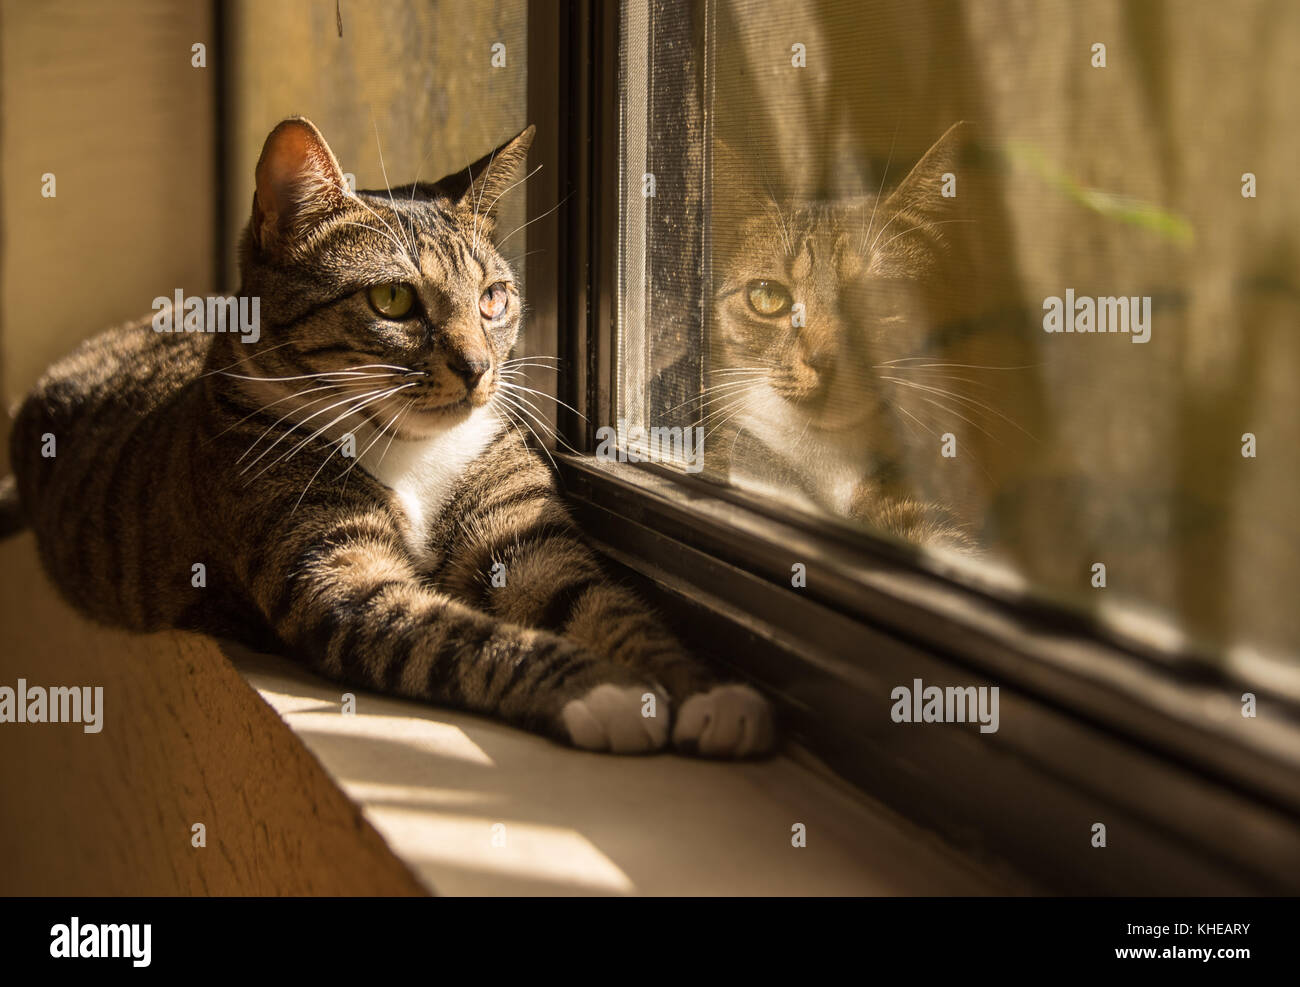 Cat Reflection In Window Stock Photo